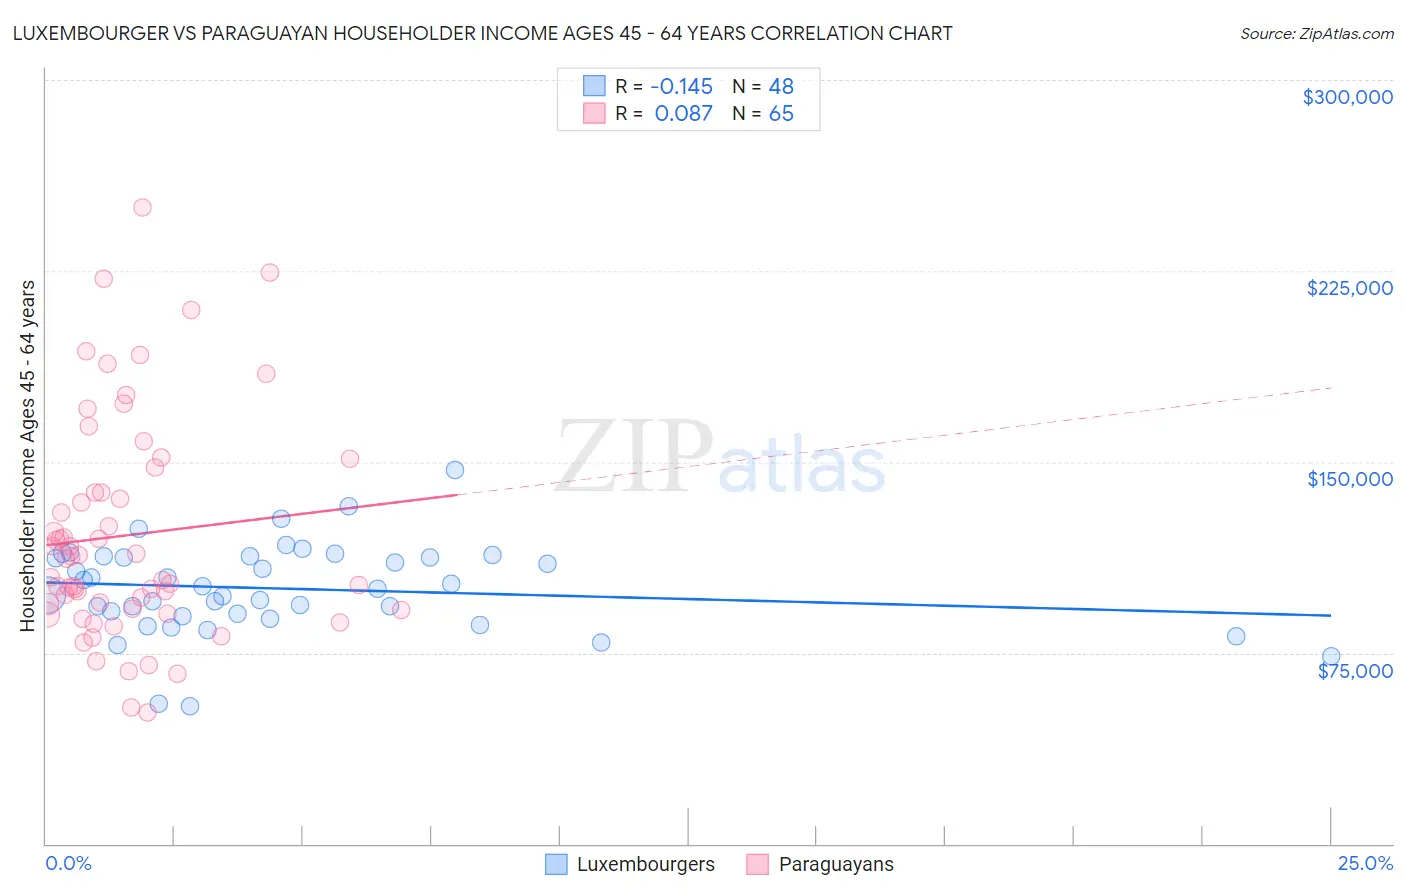 Luxembourger vs Paraguayan Householder Income Ages 45 - 64 years